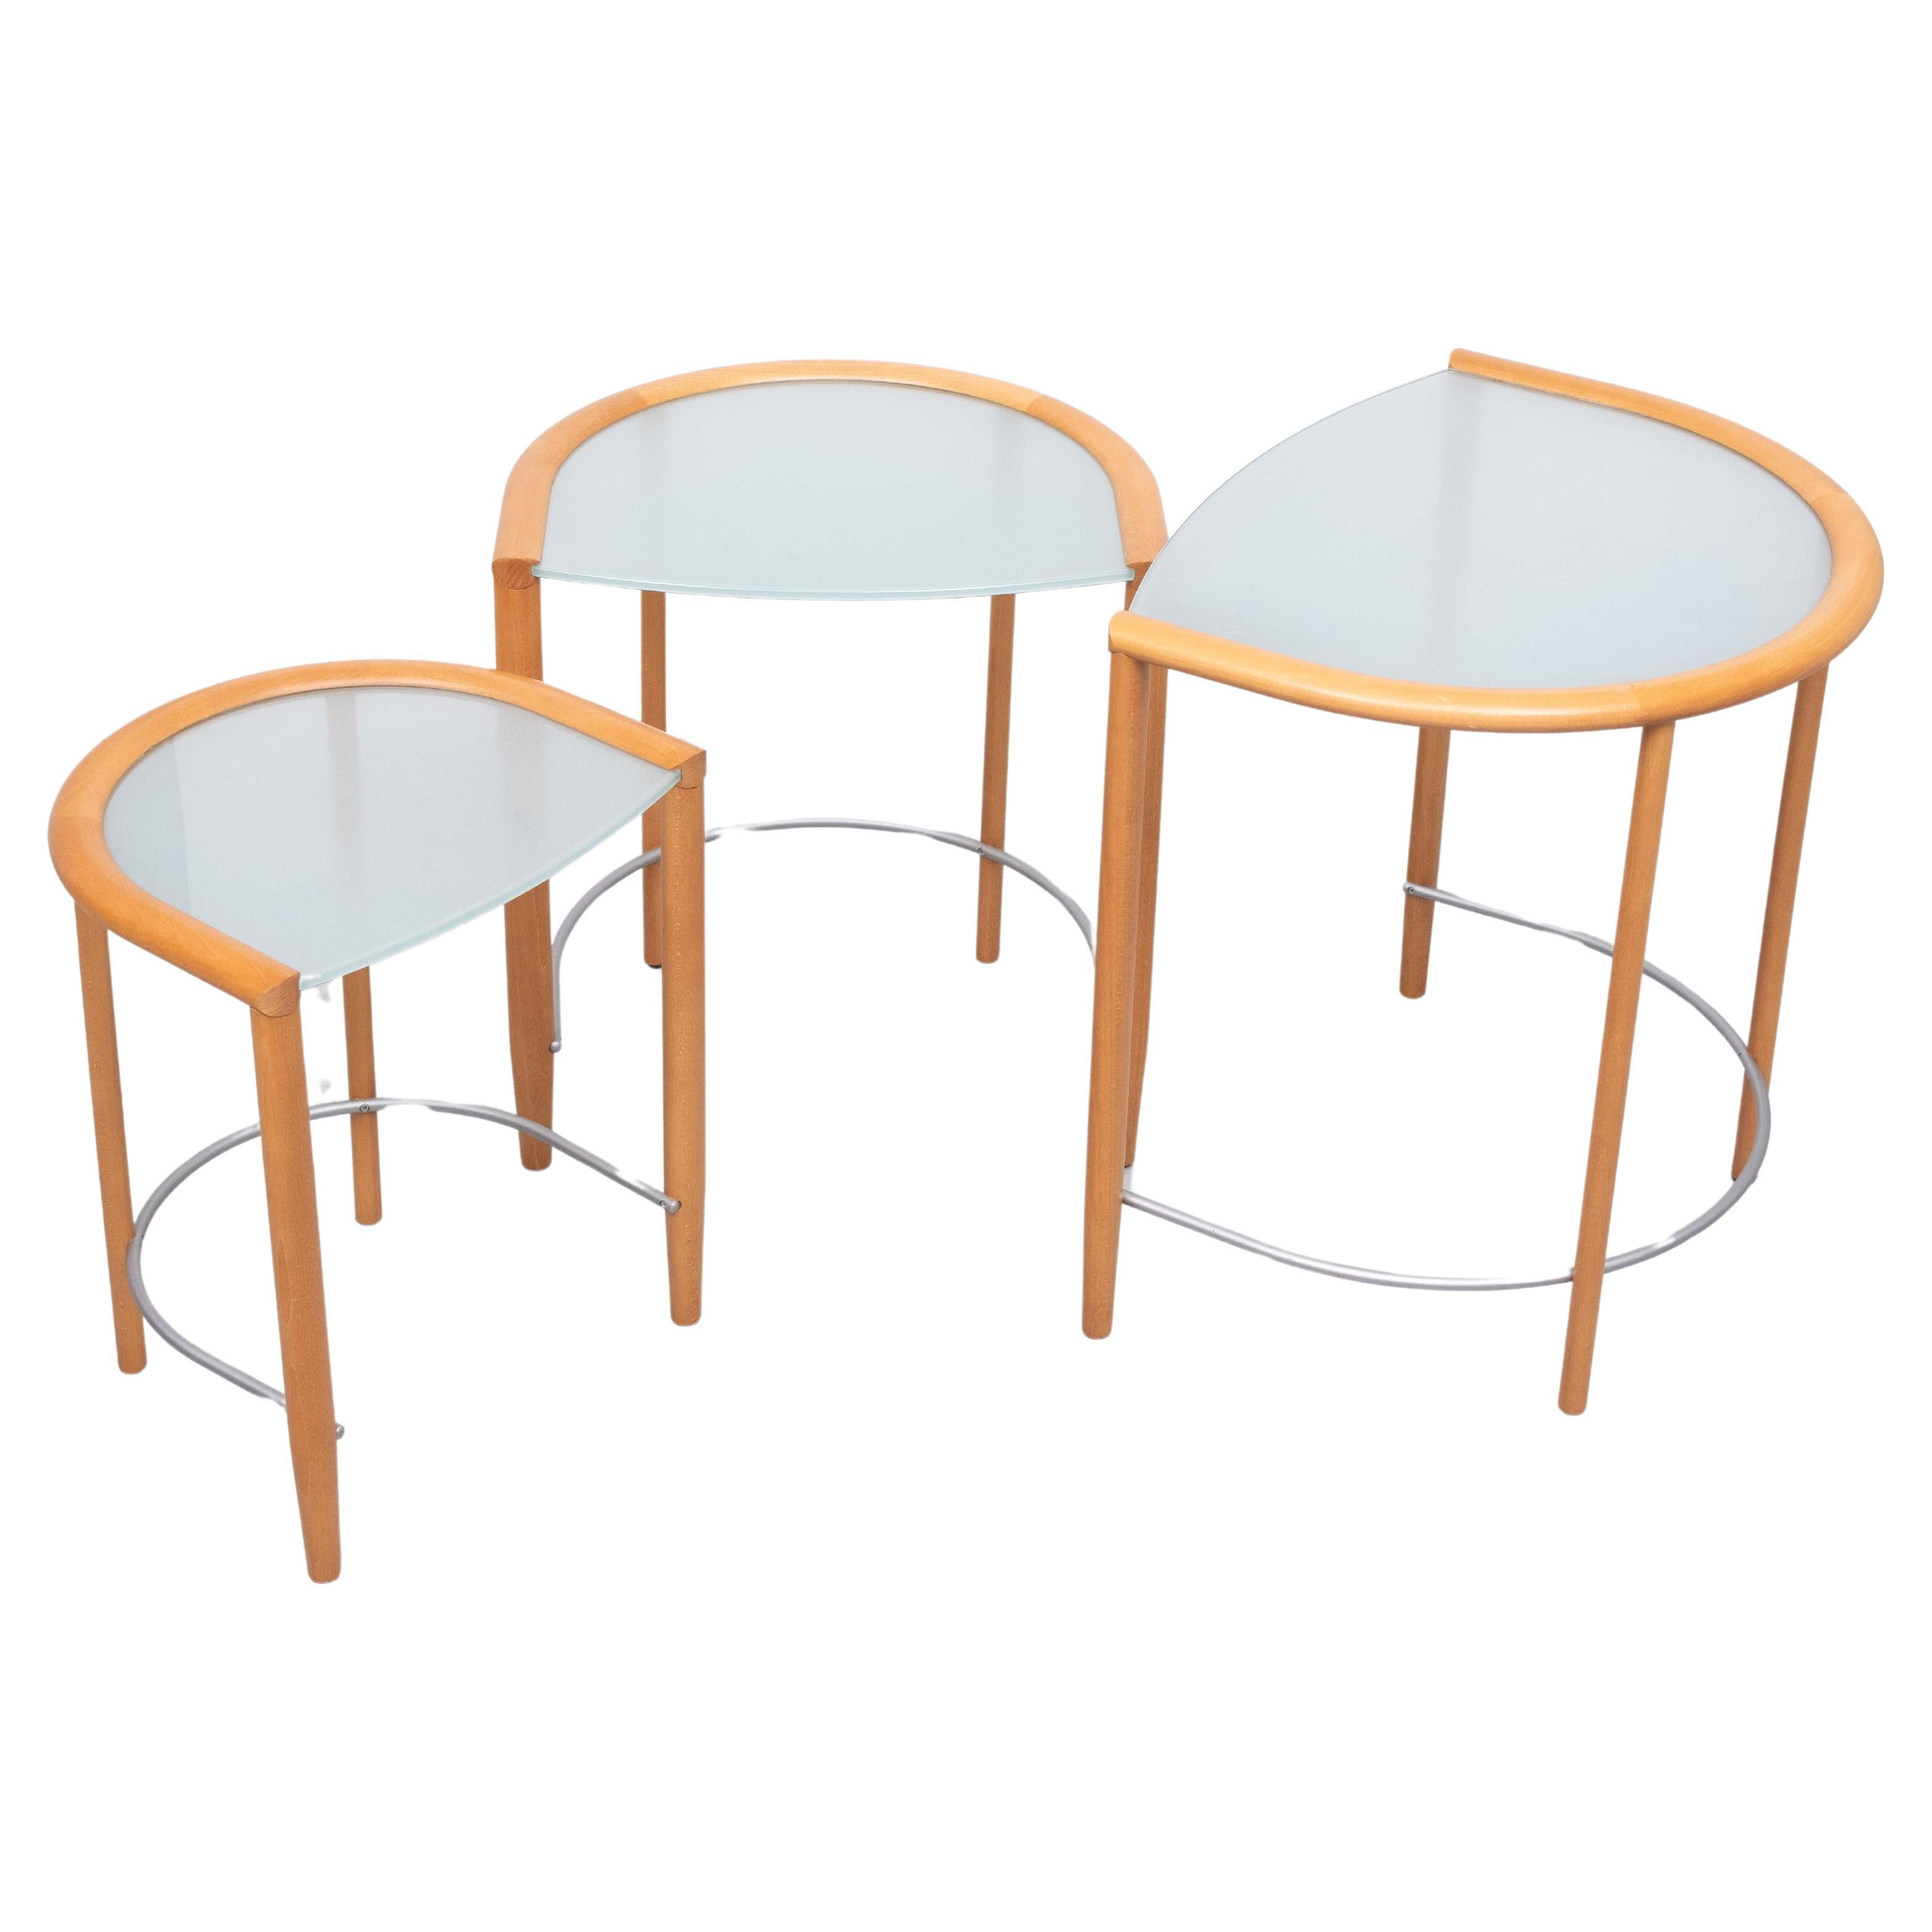 Calligaris   Italy  Nesting tables . Beautiful quality tables .
set of Three . One spot on the largest table ,see photos .